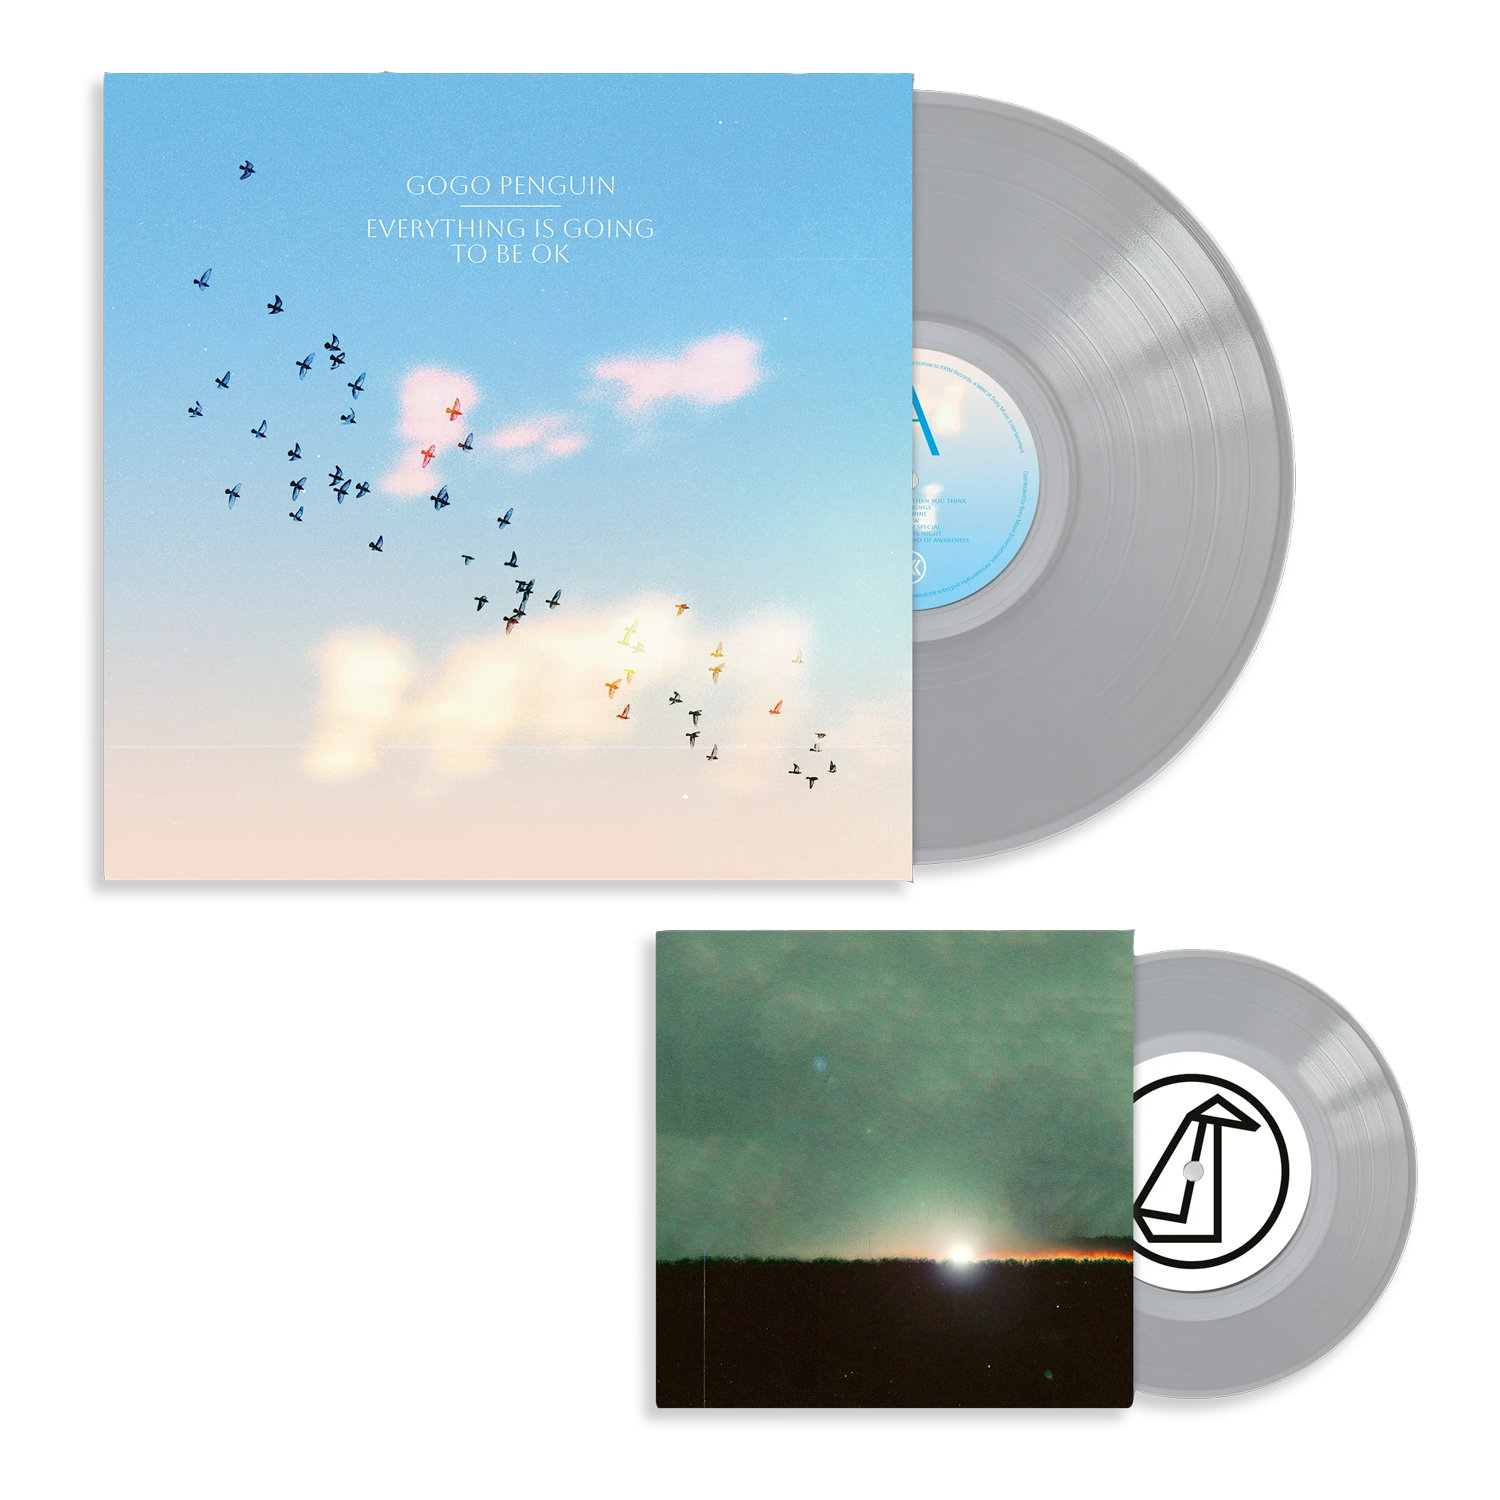 Everything Is Going To Be Okay: Limited Edition Clear Deluxe Vinyl LP + Bonus 7" Single